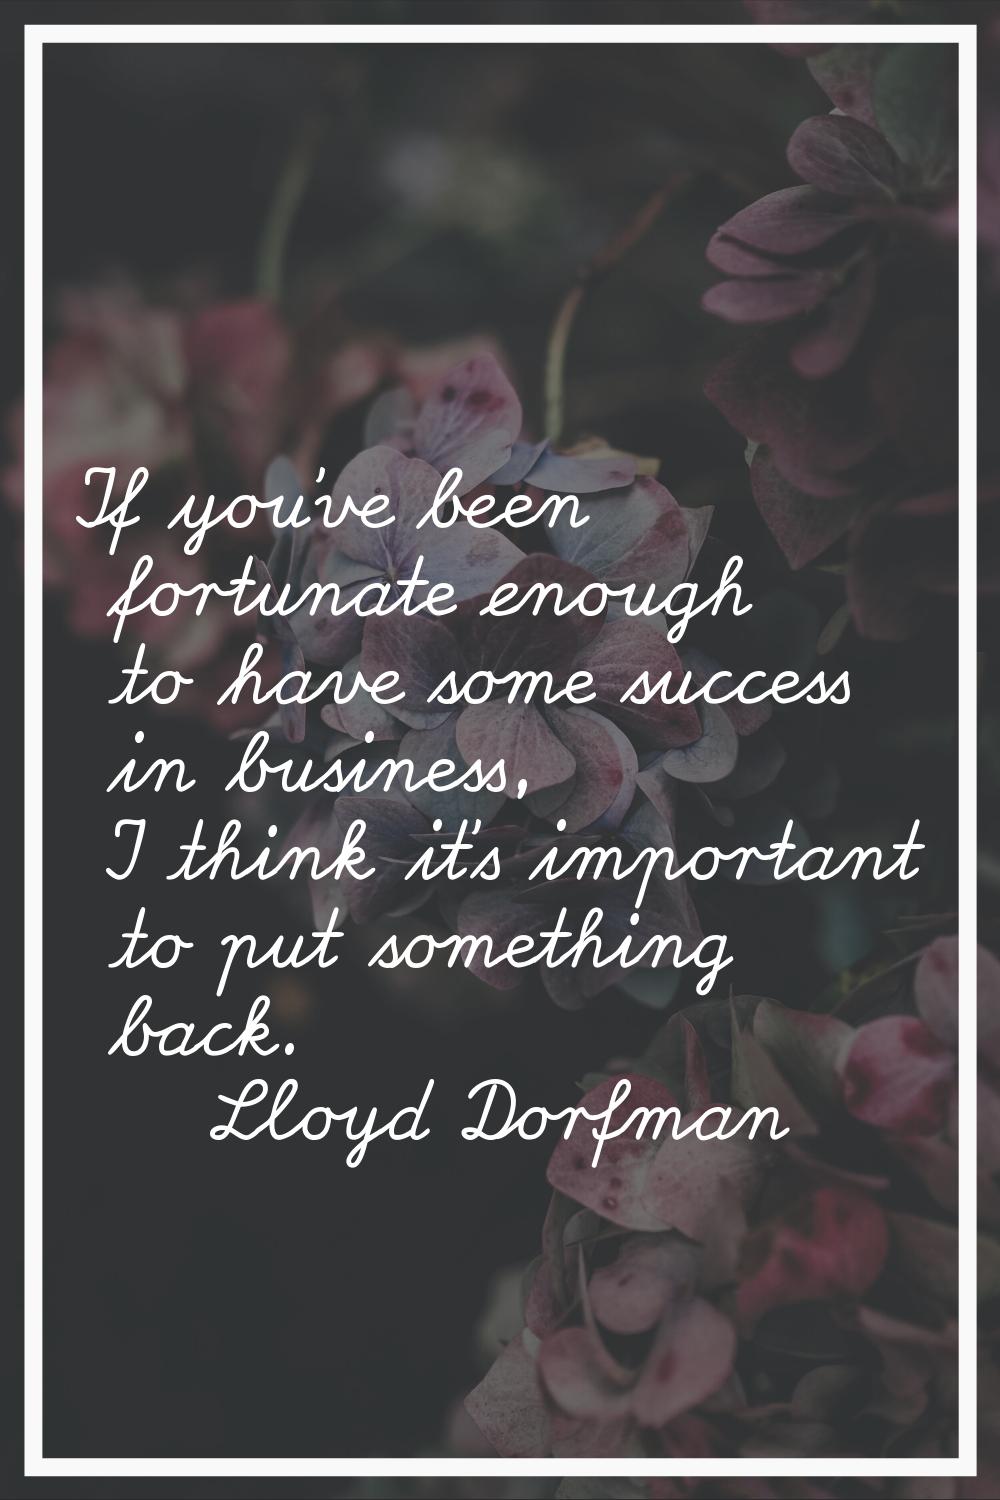 If you've been fortunate enough to have some success in business, I think it's important to put som